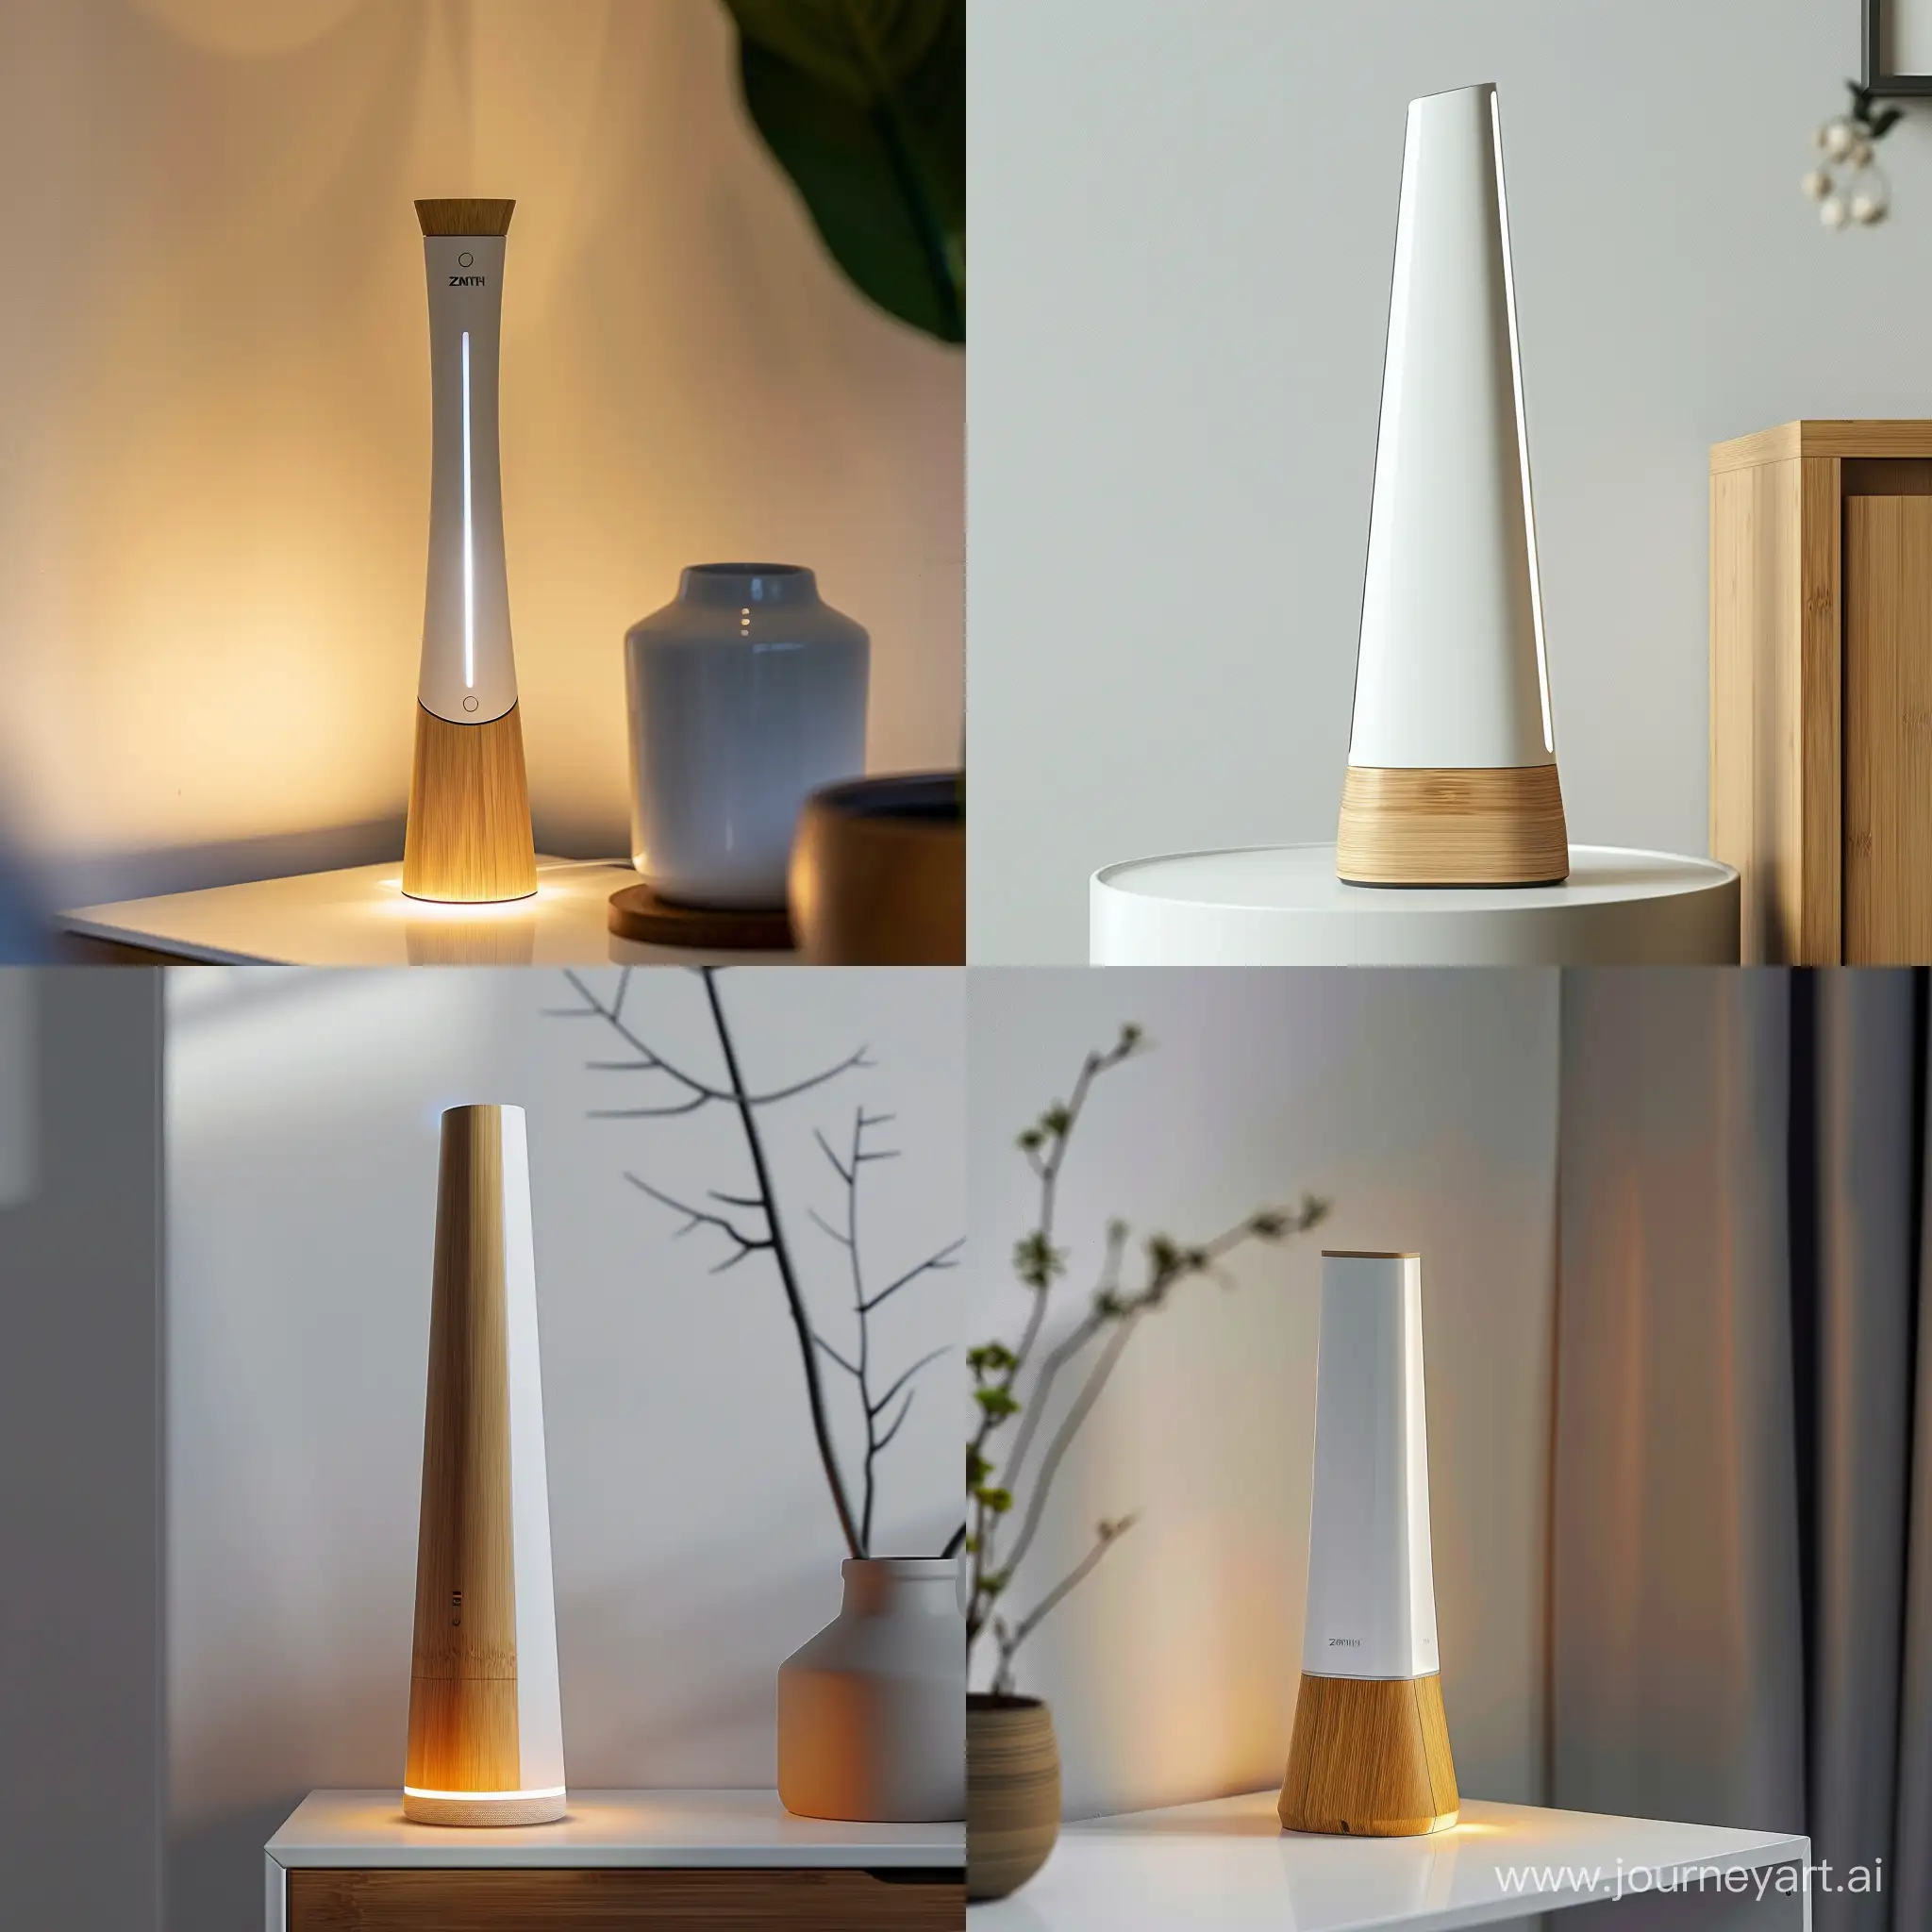 Visualize the Zenith Energy Gateway as a pinnacle of smart home energy management, blending modern design with environmental consciousness. This device embodies minimalism with its sleek, vertical silhouette, slightly tapered at the top for a subtle dynamic edge. Standing 30 cm tall with an 8 cm base diameter, its base is crafted from sustainable bamboo, offering a warm, natural aesthetic that speaks to eco-friendliness. The body, made from recycled plastics, shines in a pristine white or soft light gray, designed to complement any smart home decor with its understated elegance.
The Zenith Energy Gateway features discreet, soft LED lighting at its base and edges, providing ambient illumination and notifications in a sophisticated manner. This lighting enhances the device's futuristic appeal, creating a visual connection between the device and its smart home environment.
Designed to be both a functional energy management hub and a statement piece of technology, the Gateway stands on a minimalist side table or is mounted on a clean, white wall, integrating seamlessly into the smart home aesthetic. Its form factor and material choice symbolize a commitment to sustainability, innovation, and design excellence, aiming to resonate with modern homeowners who prioritize eco-conscious living without compromising on style.
The image should capture the essence of the Zenith Energy Gateway in a contemporary setting, highlighting its role as an elegant, technologically advanced, and environmentally friendly addition to the smart home.